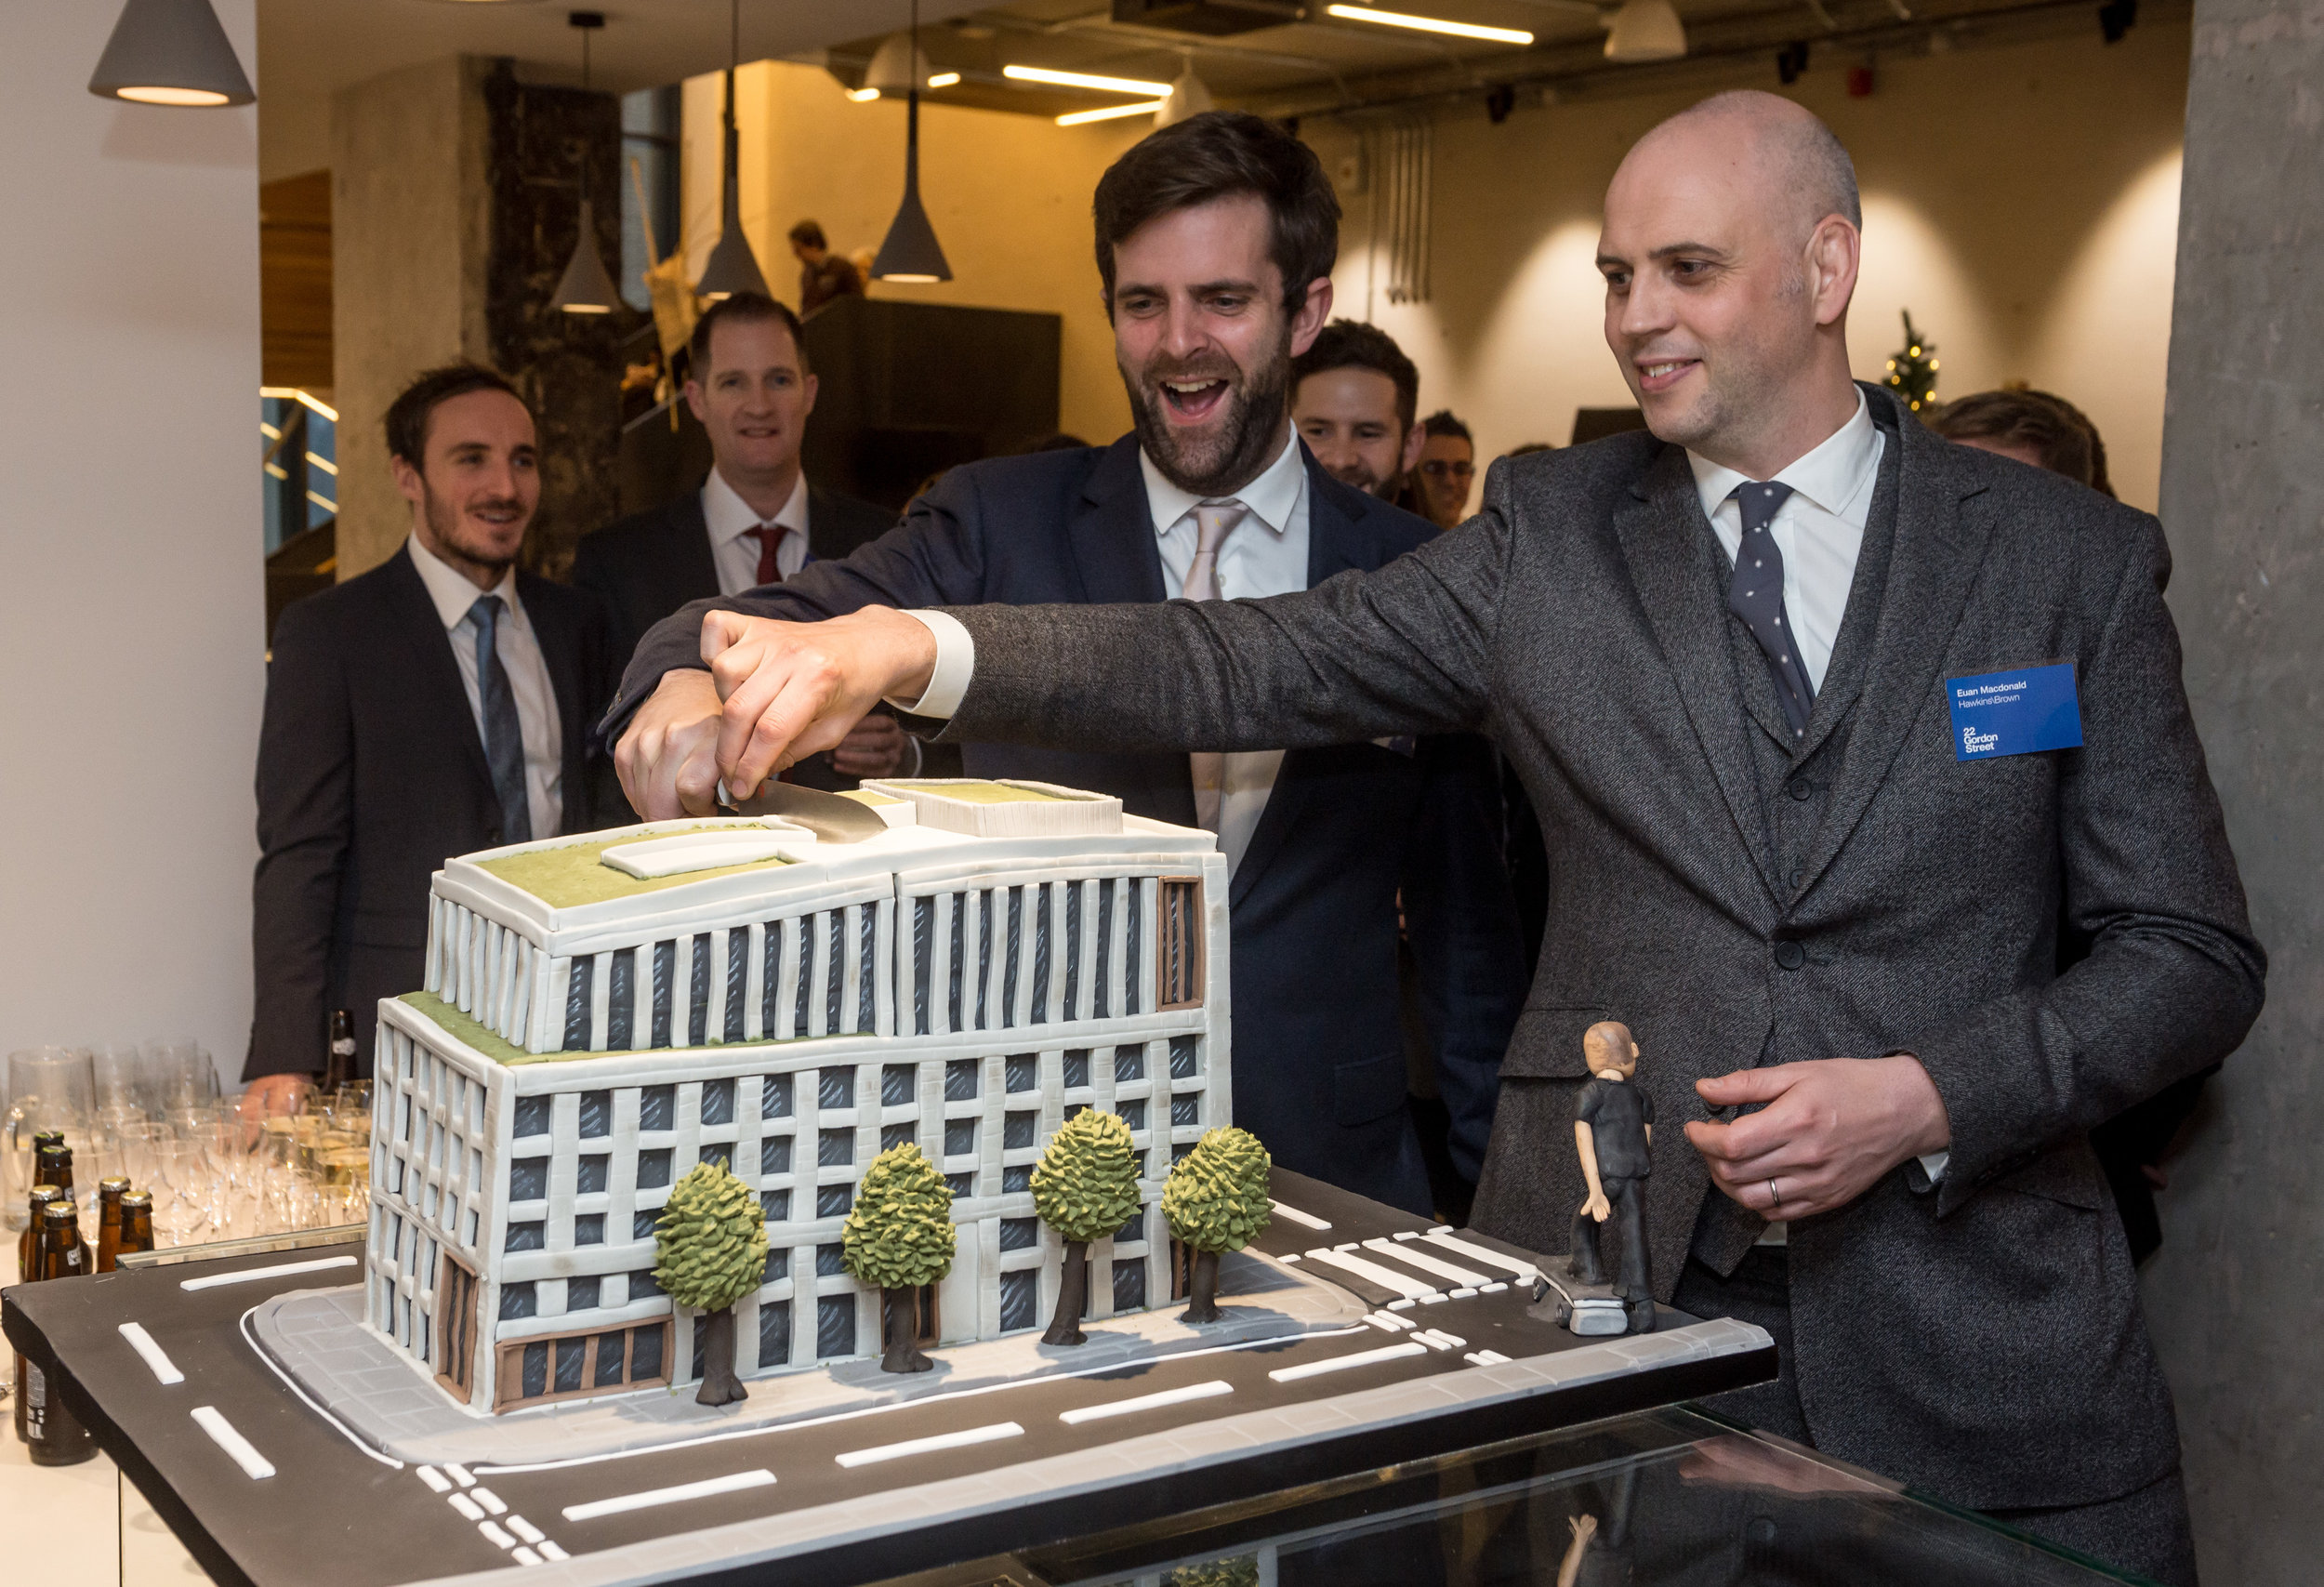  Euan MacDonald and Tom Noonan (Architects Hawkins/Brown) cut a cake version of the building during the official opening reception at the refurbished  Bartlett School of Architecture, 22 Gordon Street. London 
Hawkins/Brown architects 